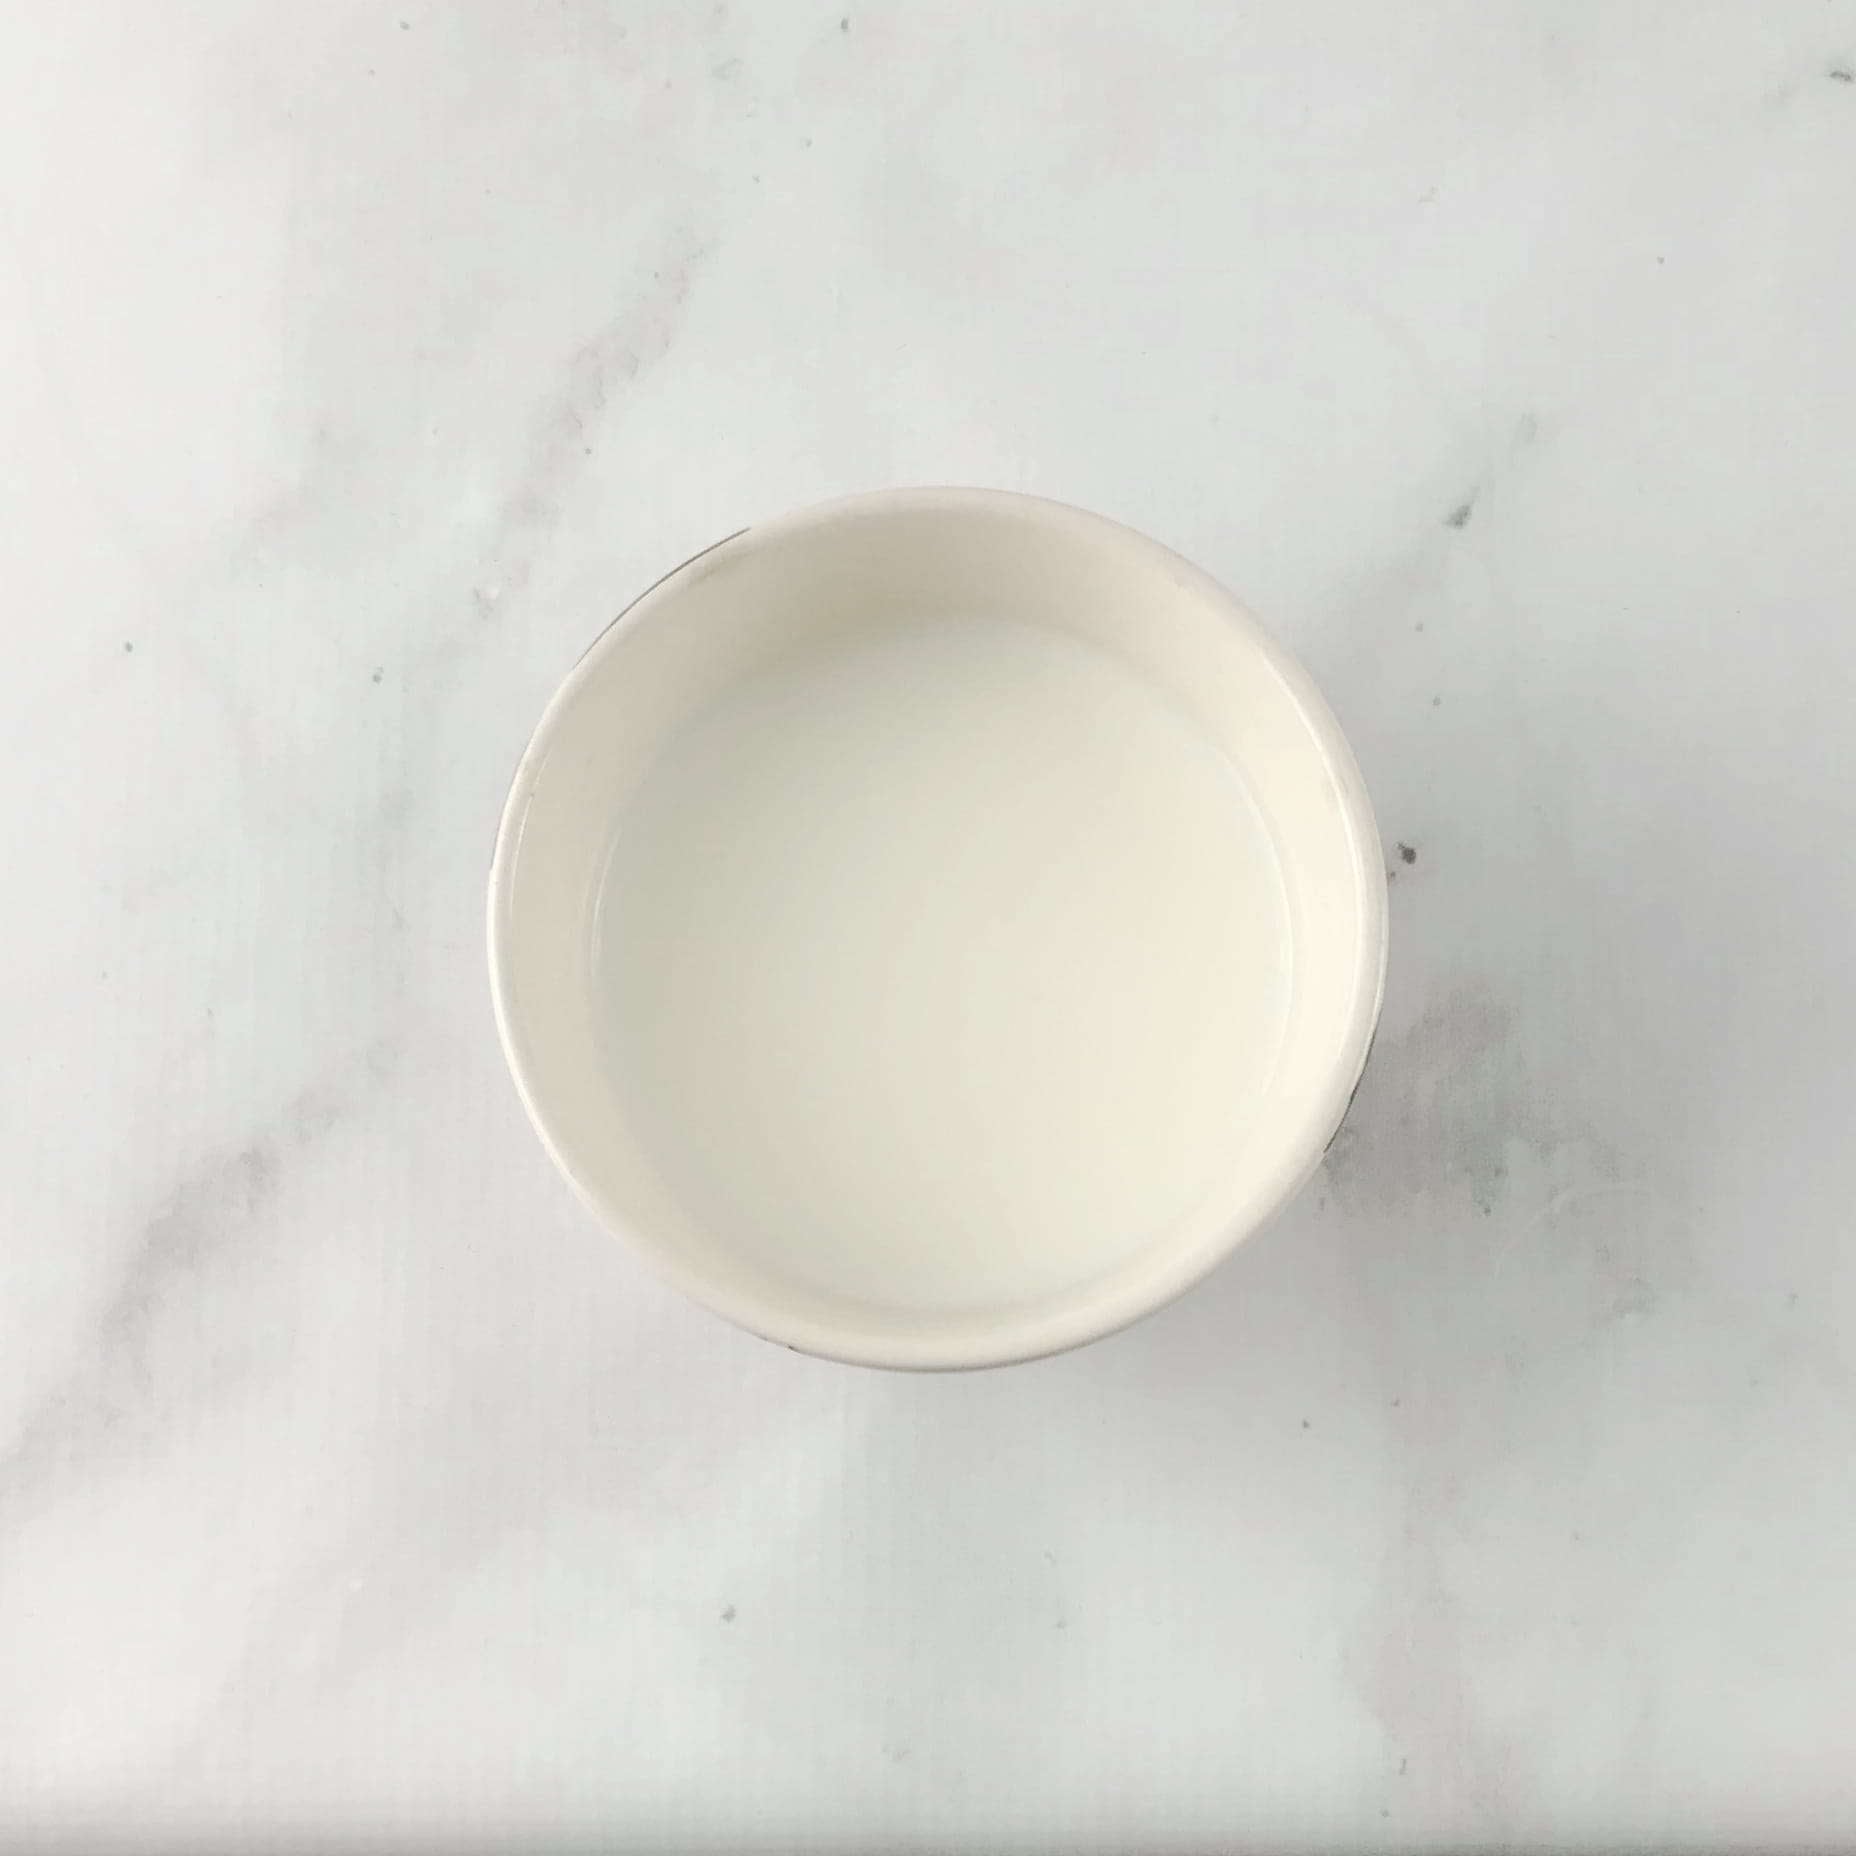 Photo of bowl of milk on marble counter from 